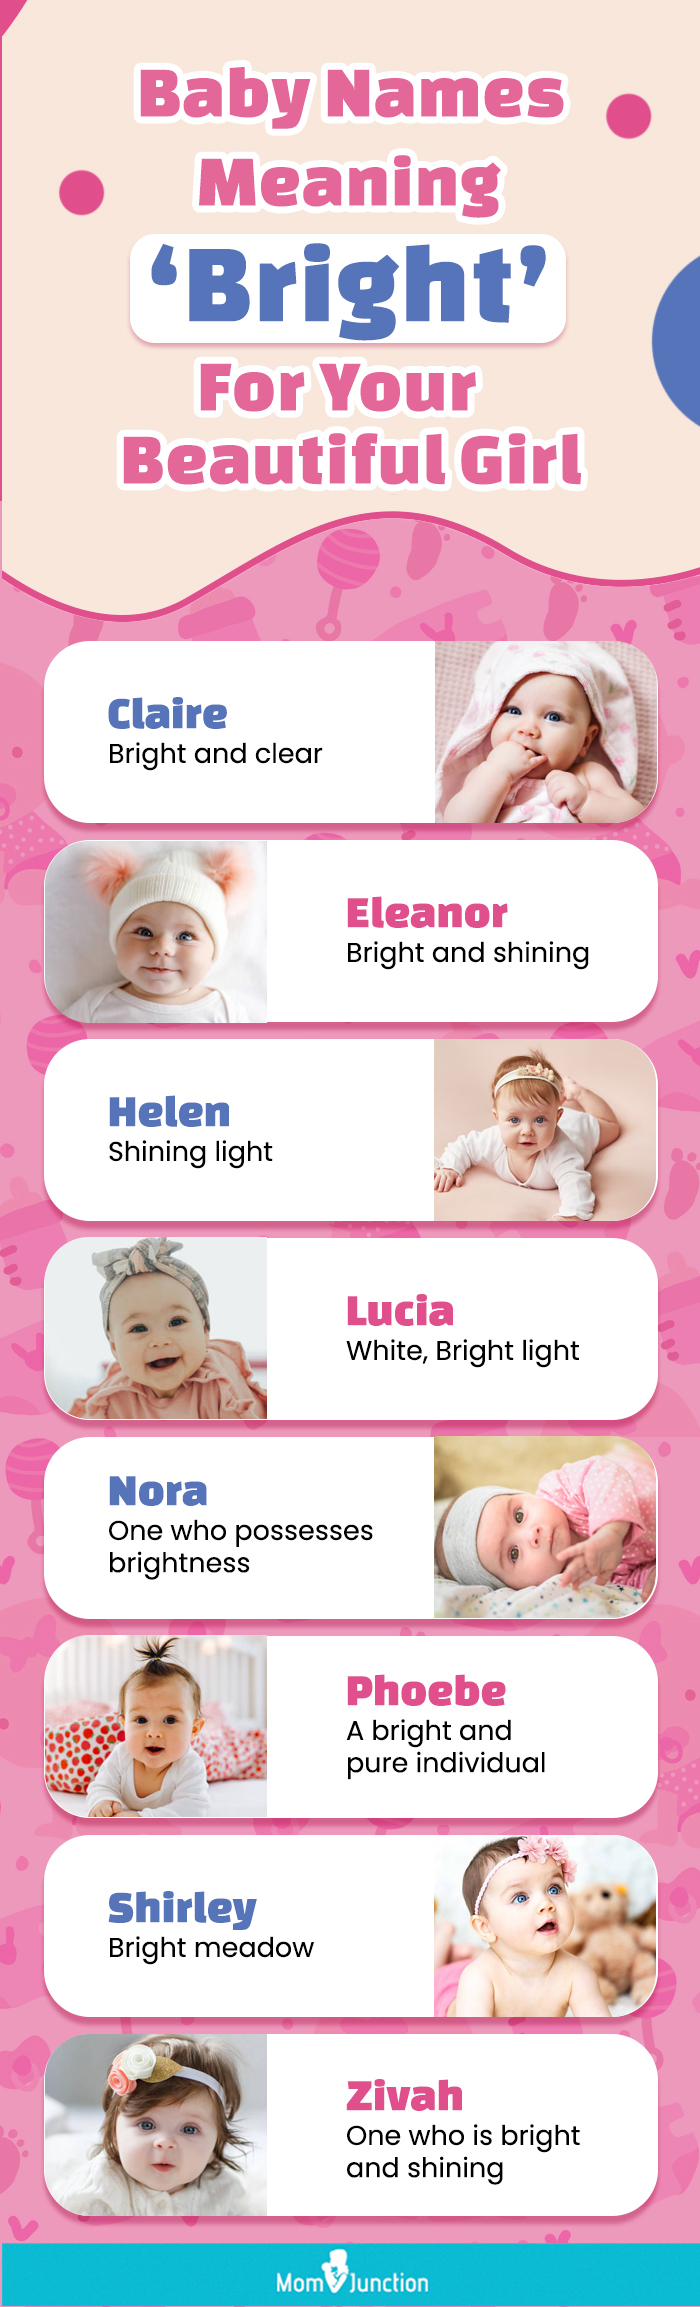 baby names meaning bright for your beautiful girl (infographic)